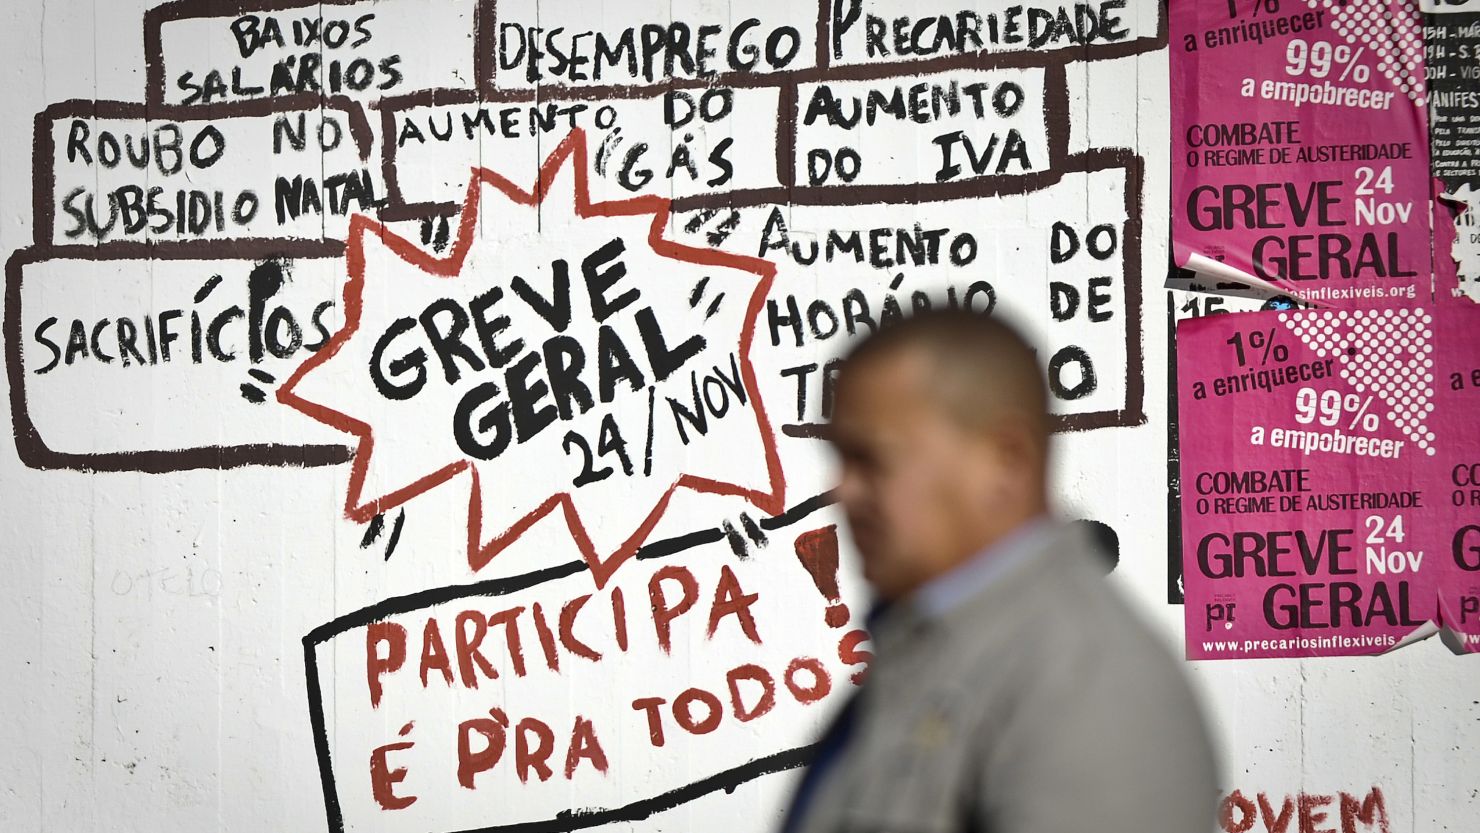 Portugal's strike was called by two of the country's main unions amid widespread anger at proposed austerity measures.